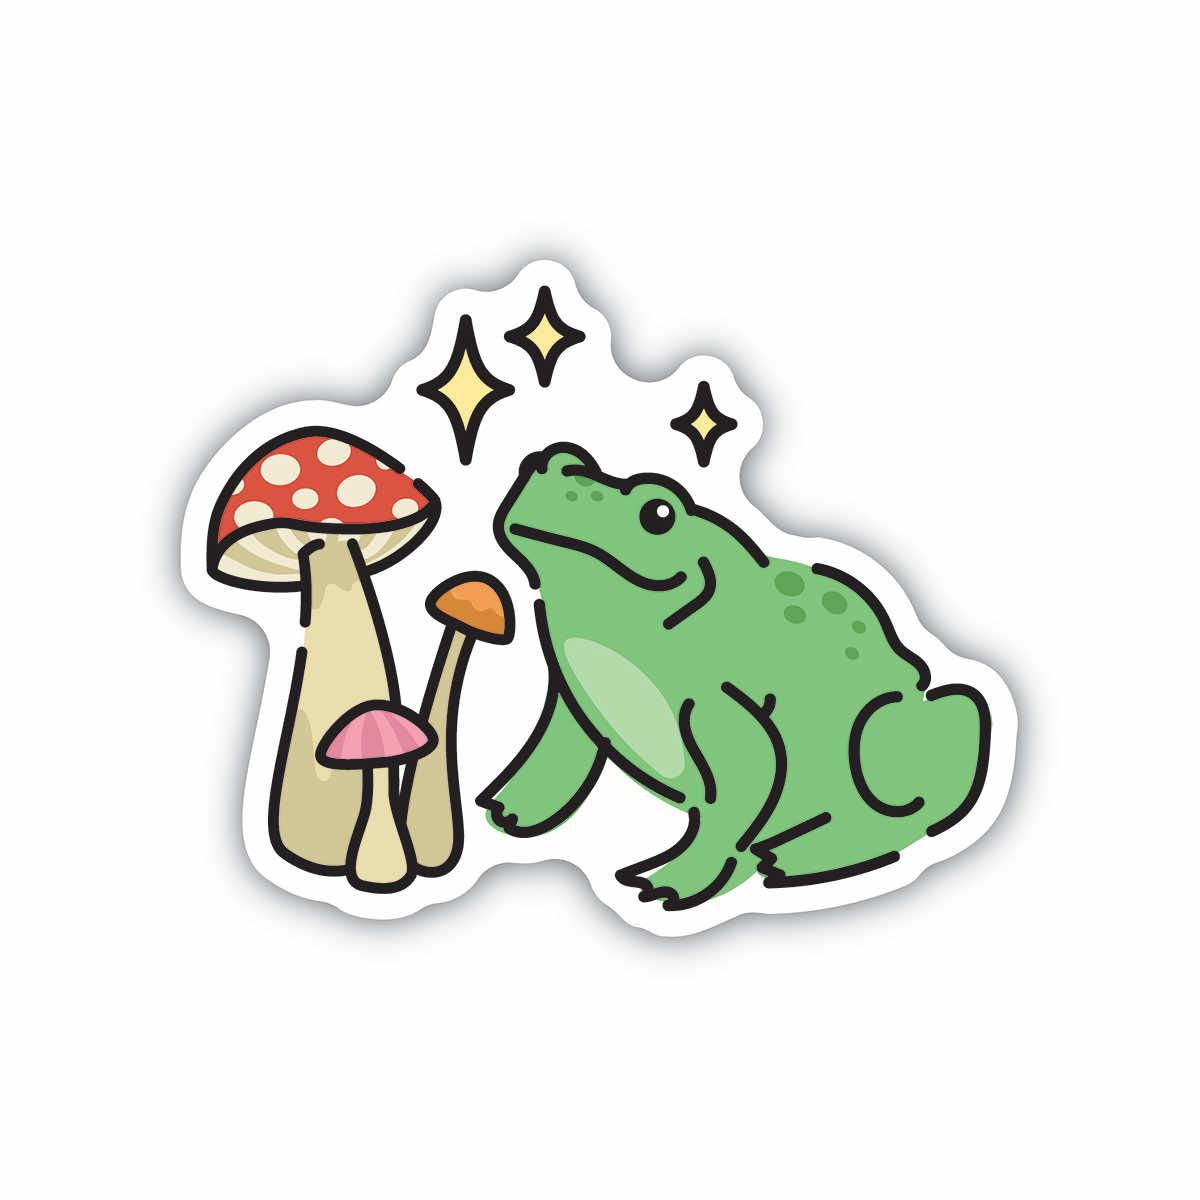 Frog Stack Vinyl Sticker, Cute Frogs and Mushrooms Sticker – Forager Vintage